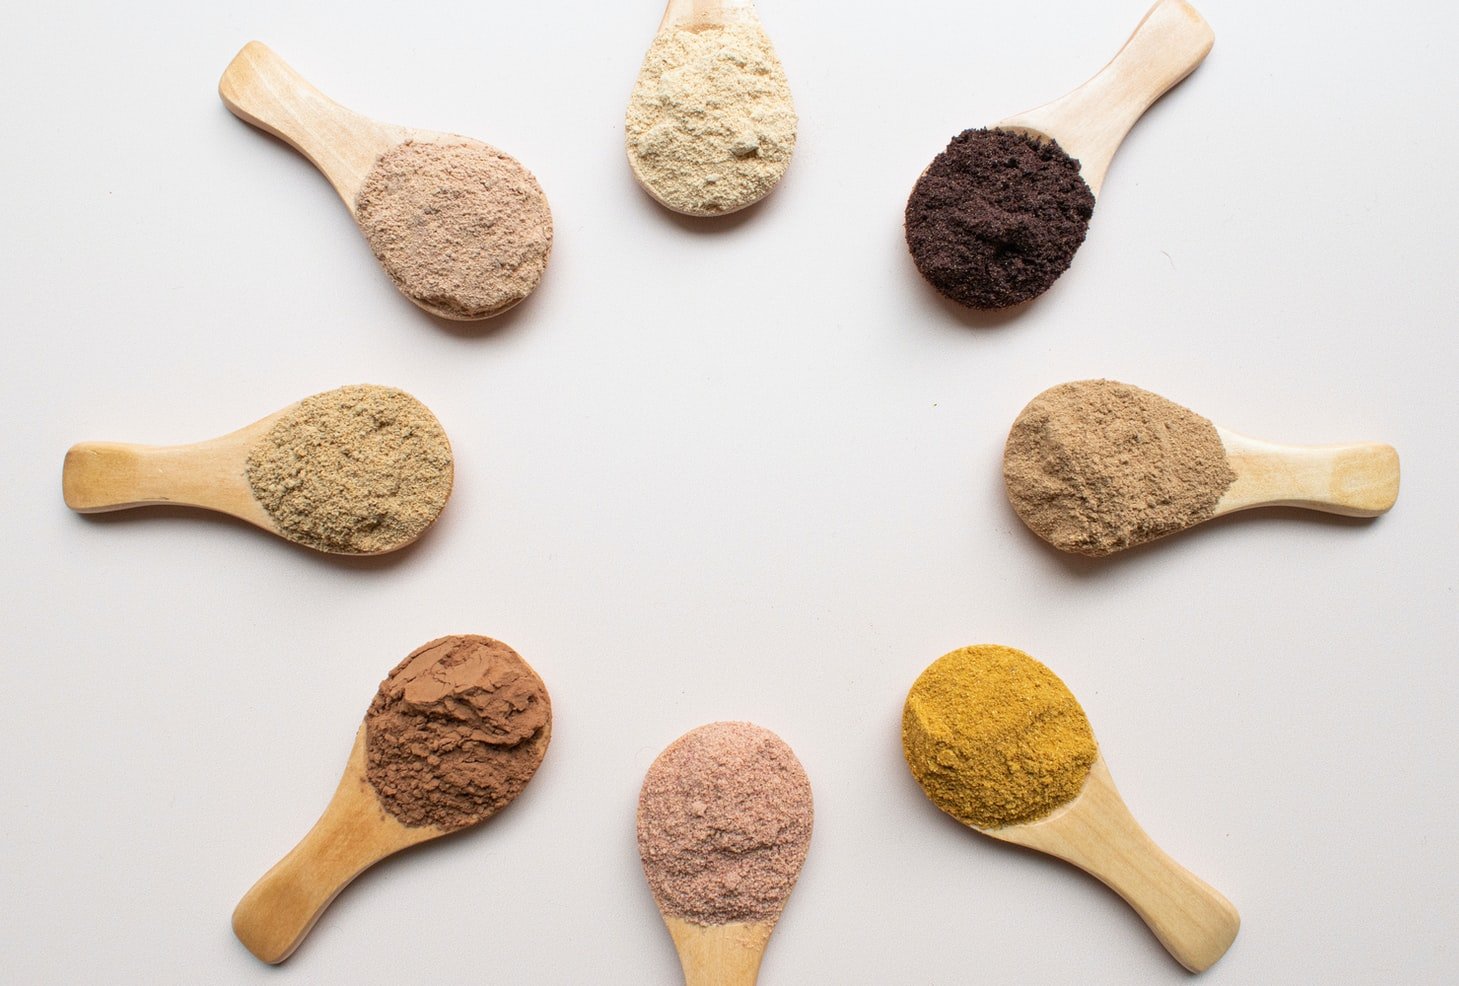 Powdered superfoods arranged on individual spoons.